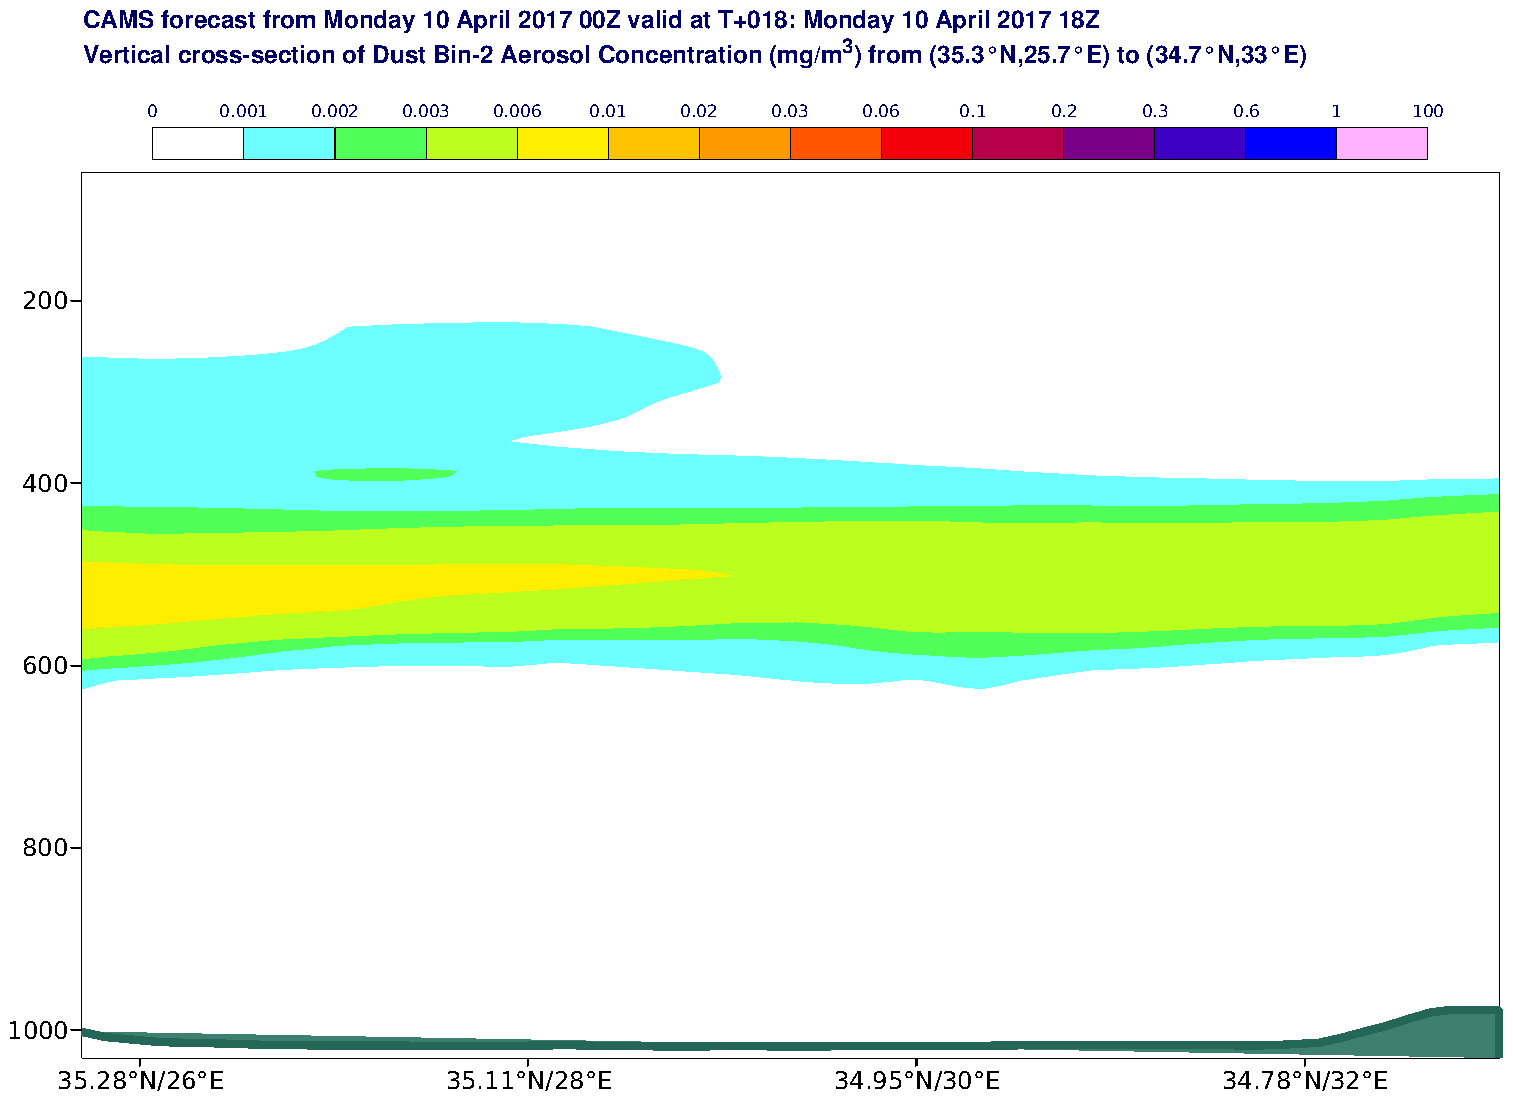 Vertical cross-section of Dust Bin-2 Aerosol Concentration (mg/m3) valid at T18 - 2017-04-10 18:00